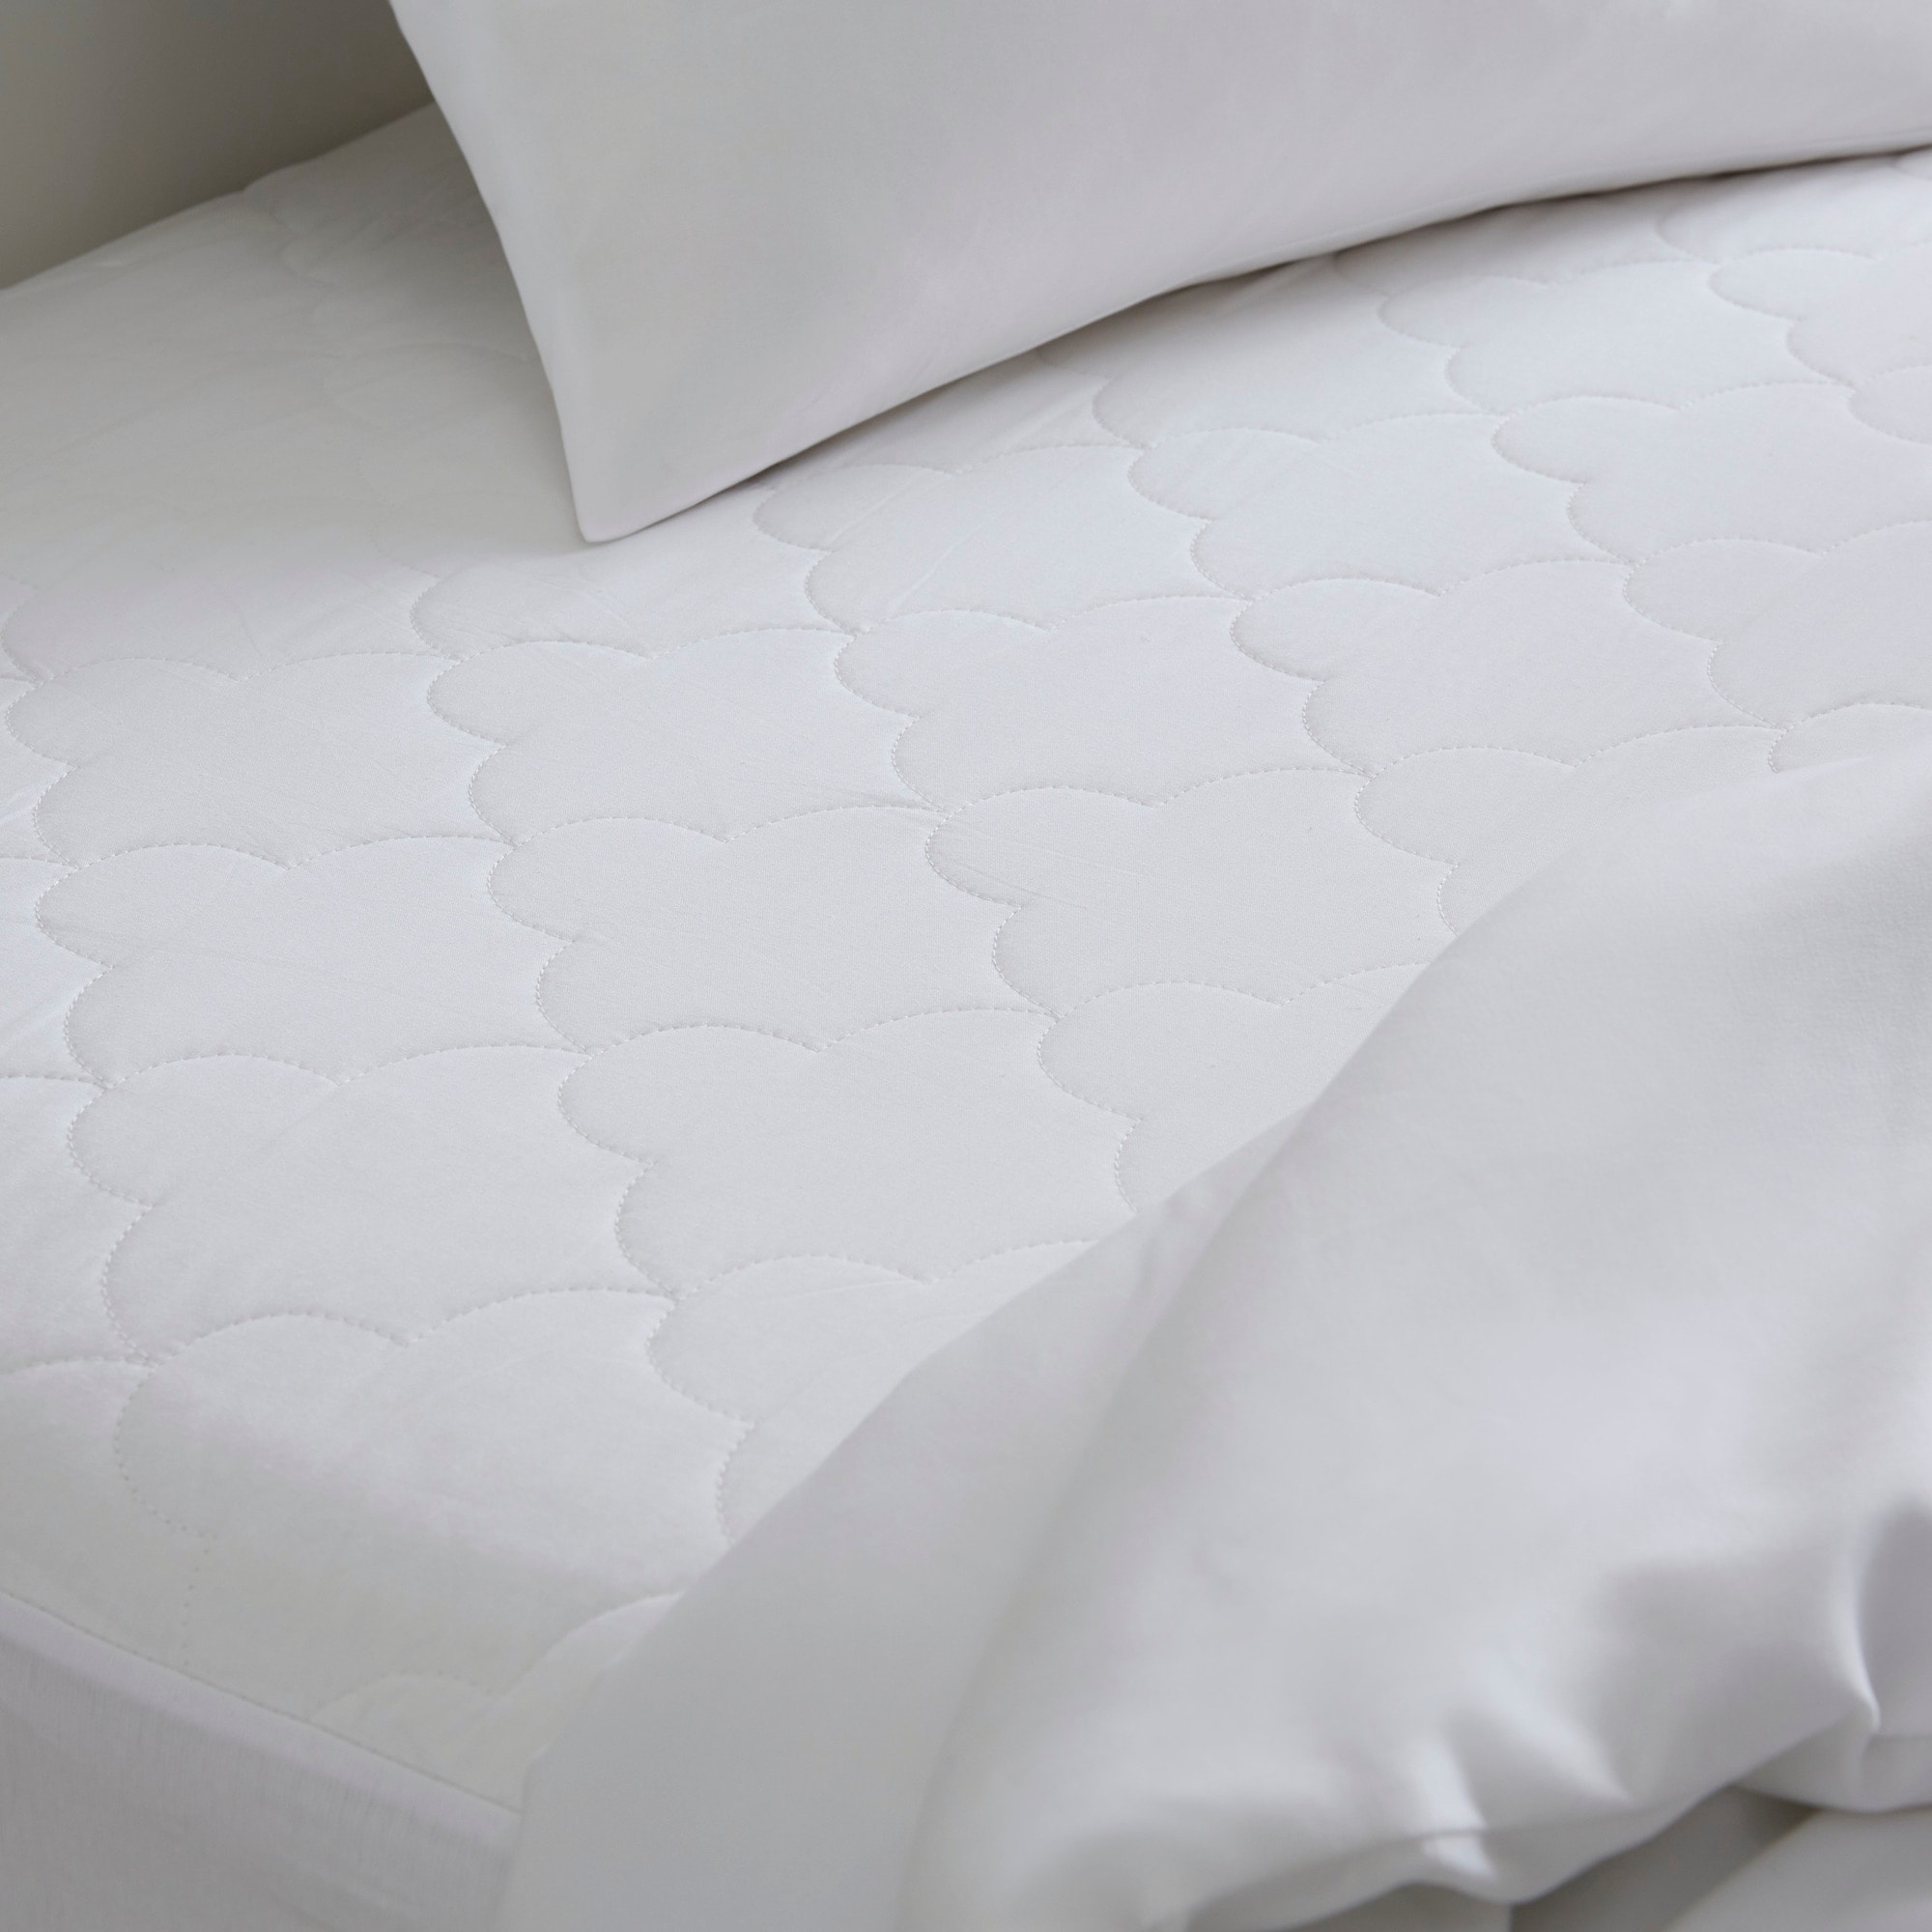 https://ak1.ostkcdn.com/images/products/is/images/direct/5cb3f2c8b8444583110ba99a167ae4e115f8217e/Sleep-Philosophy-All-Natural-Cotton-Percale-Quilted-Mattress-Pad.jpg